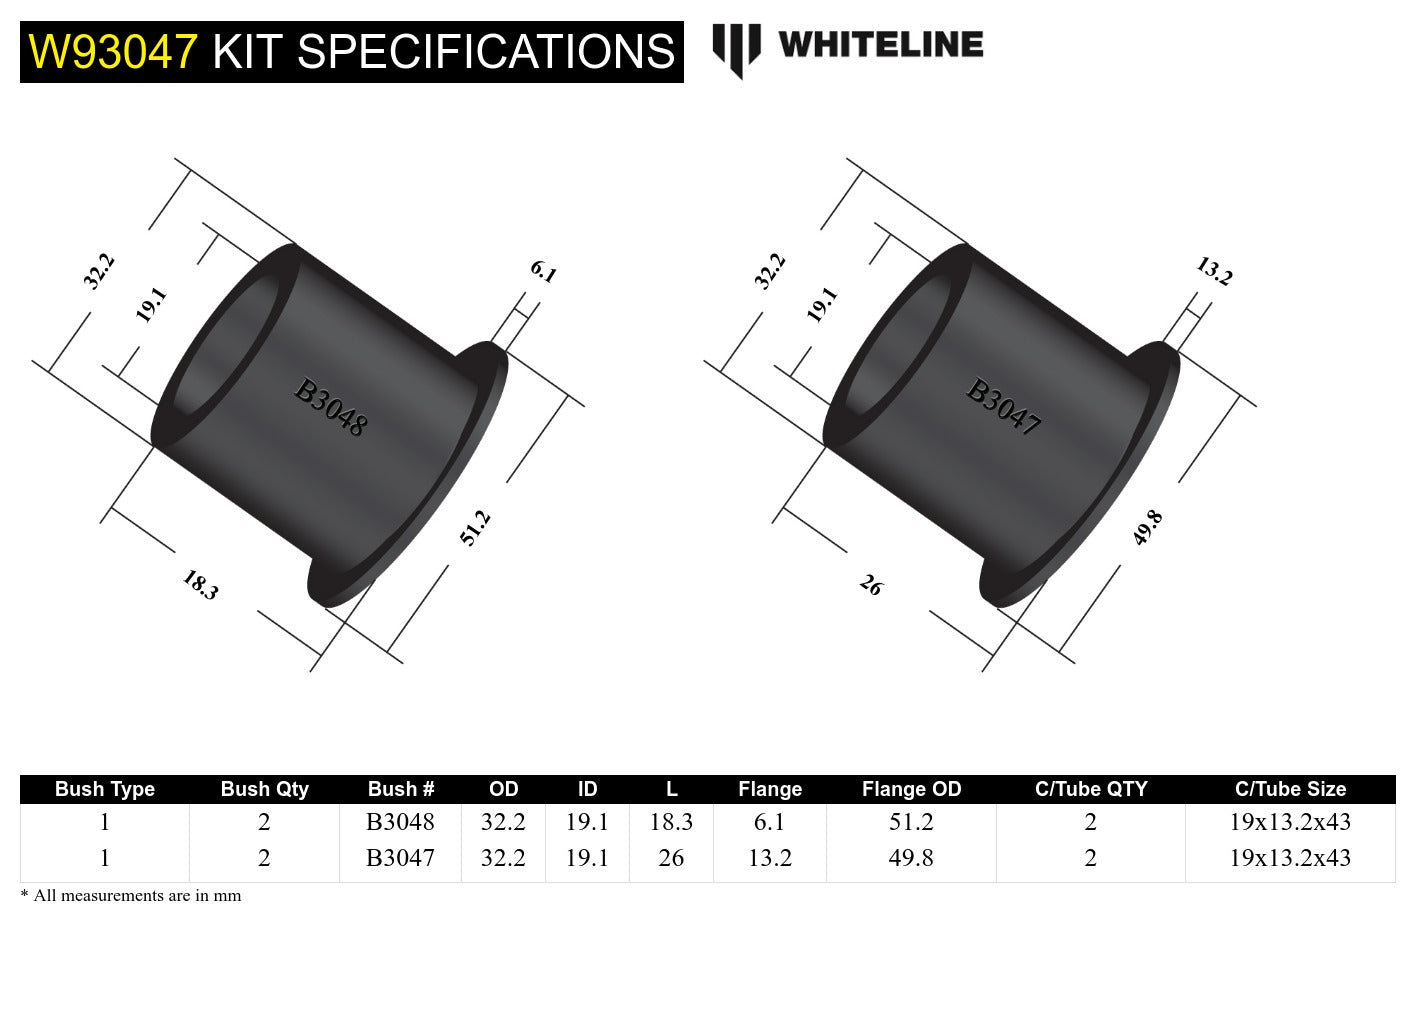 Differential - mount support front bushing